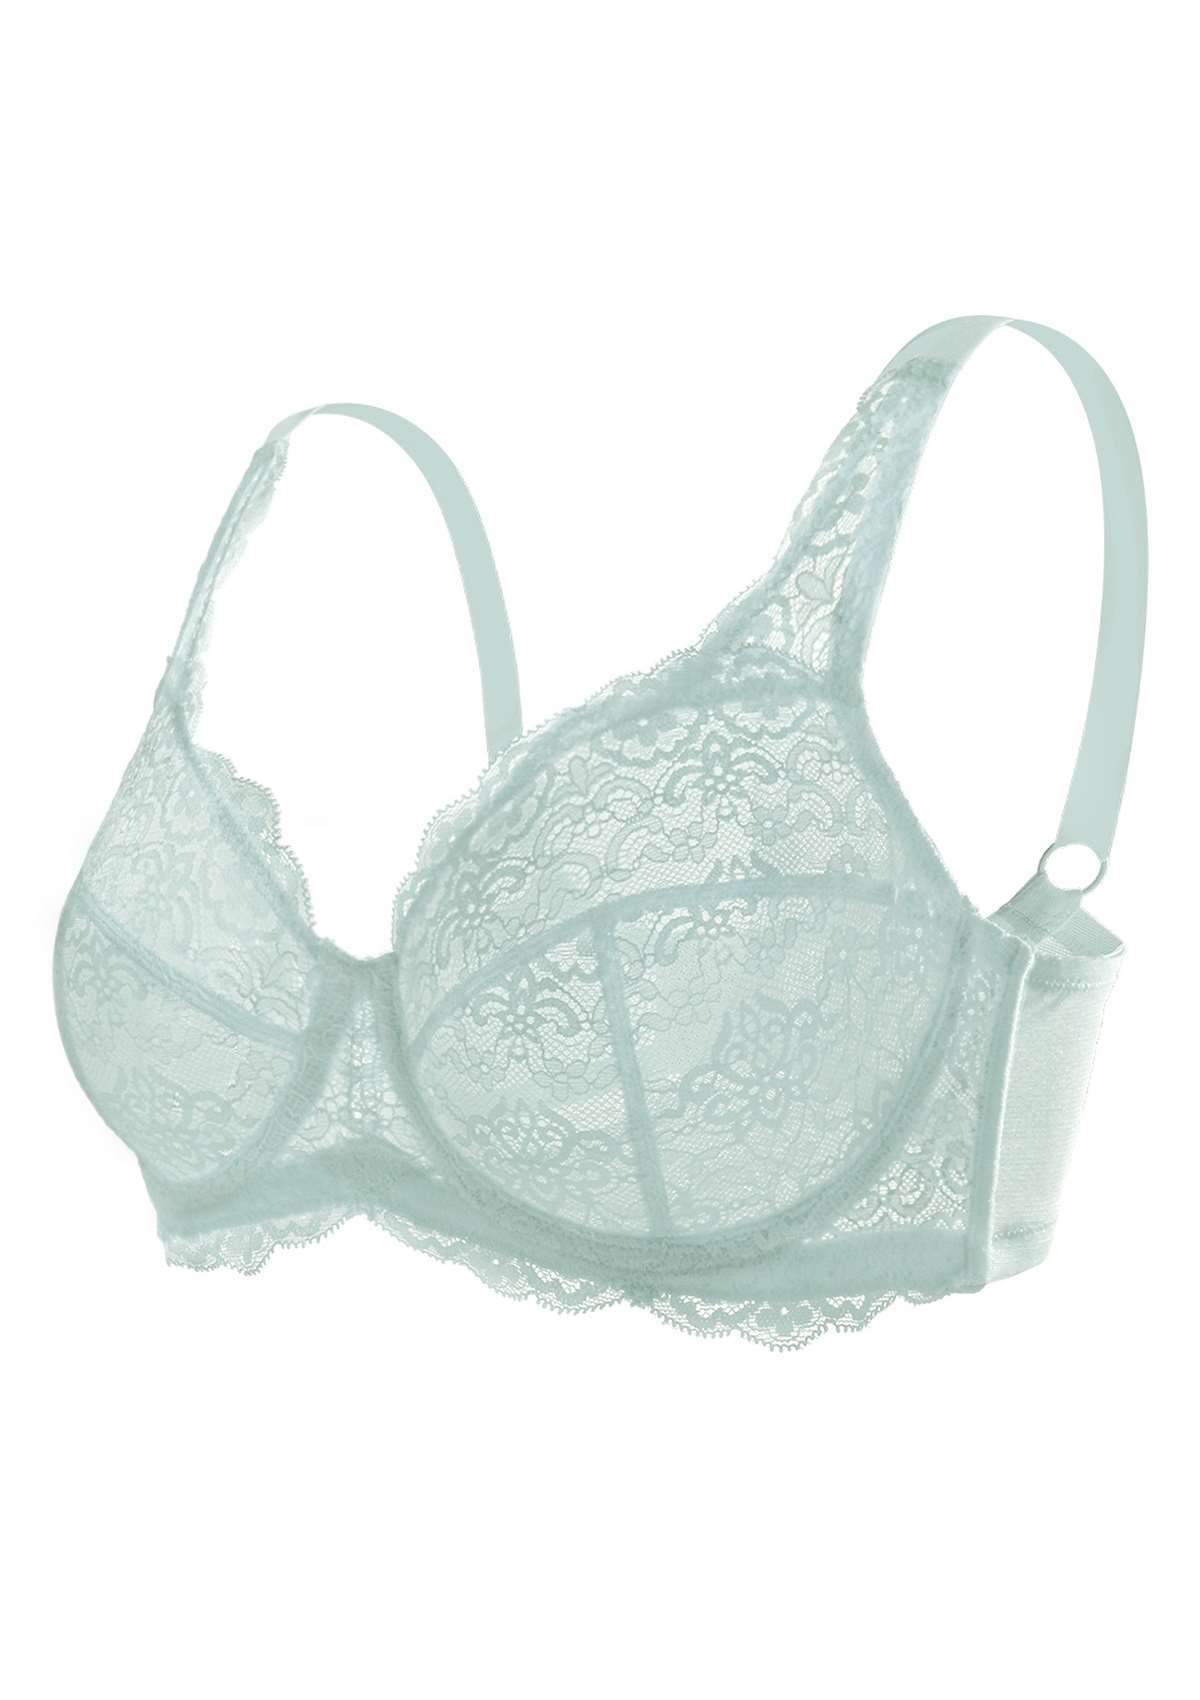 HSIA All-Over Floral Lace: Best Bra For Elderly With Sagging Breasts - Pewter Blue / 36 / DD/E